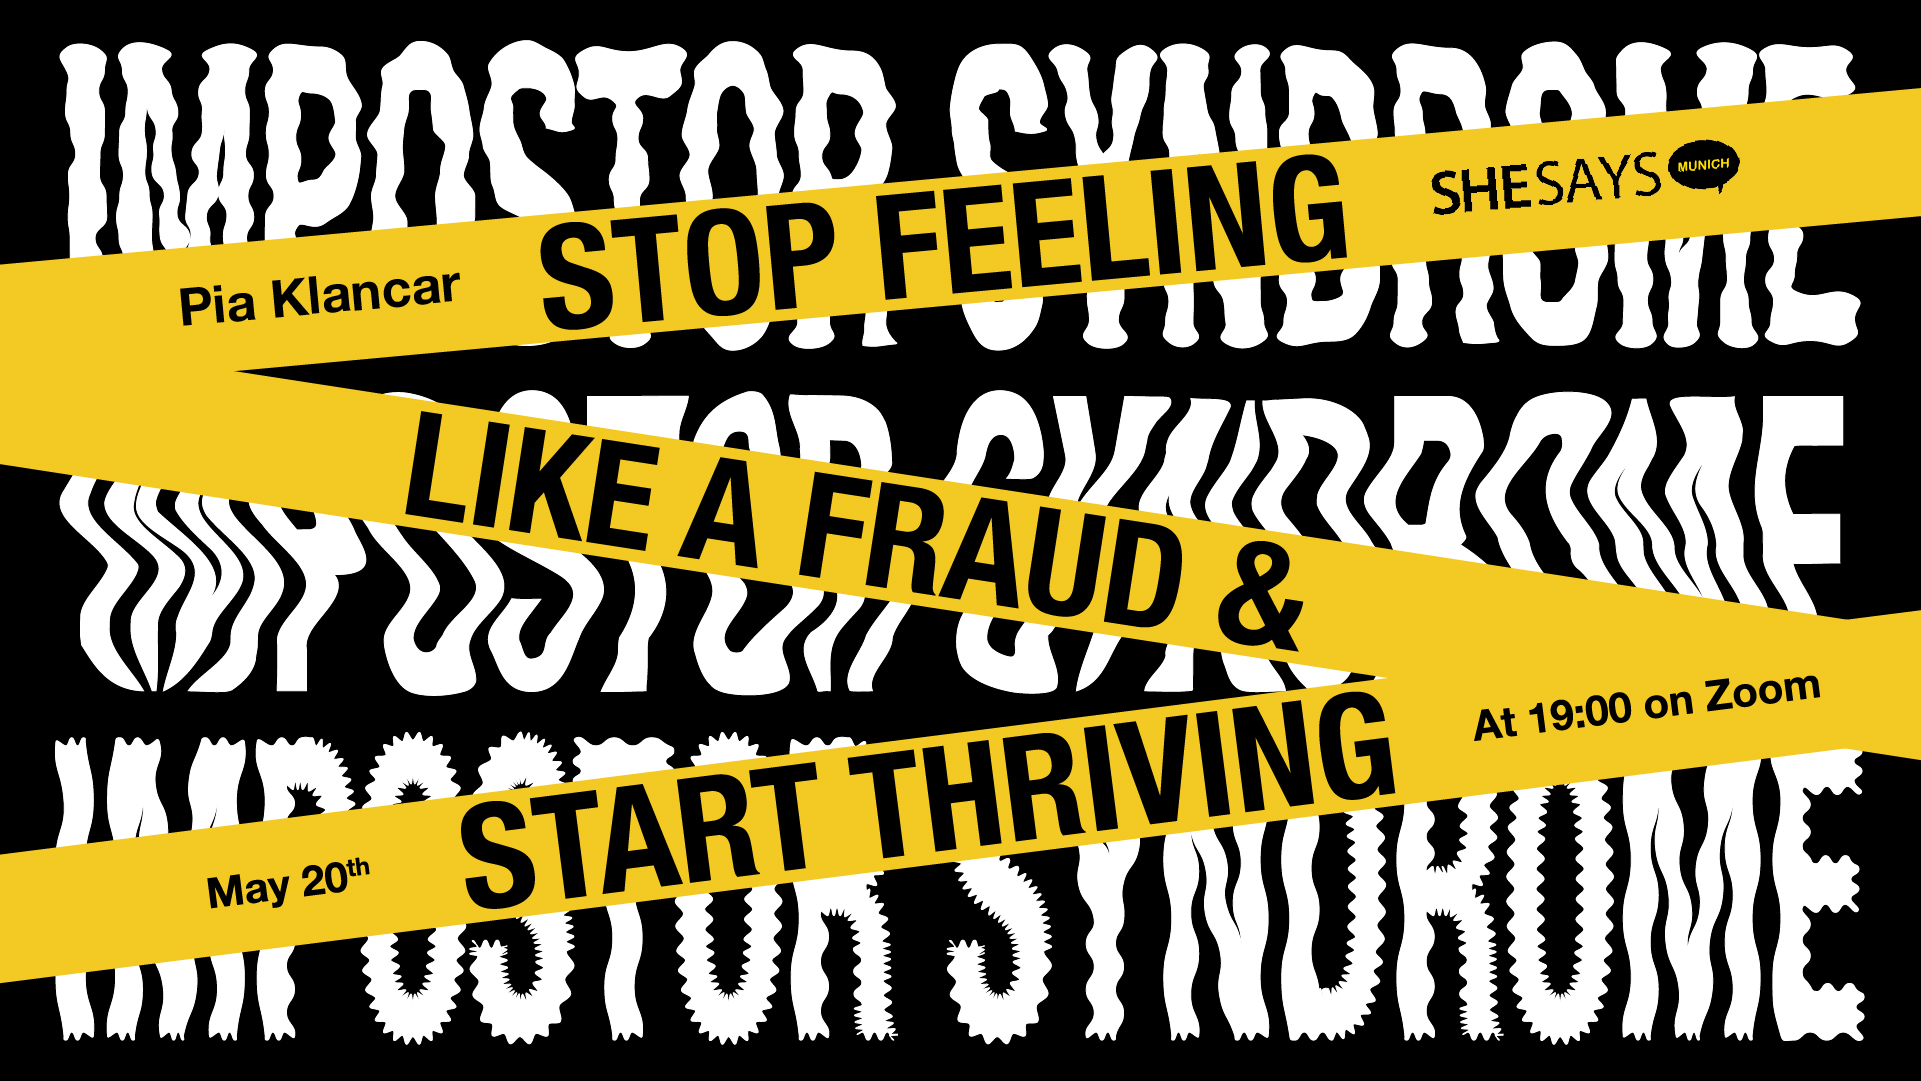 Stop feeling like a fraud and start thriving: Impostor syndrome and beyond